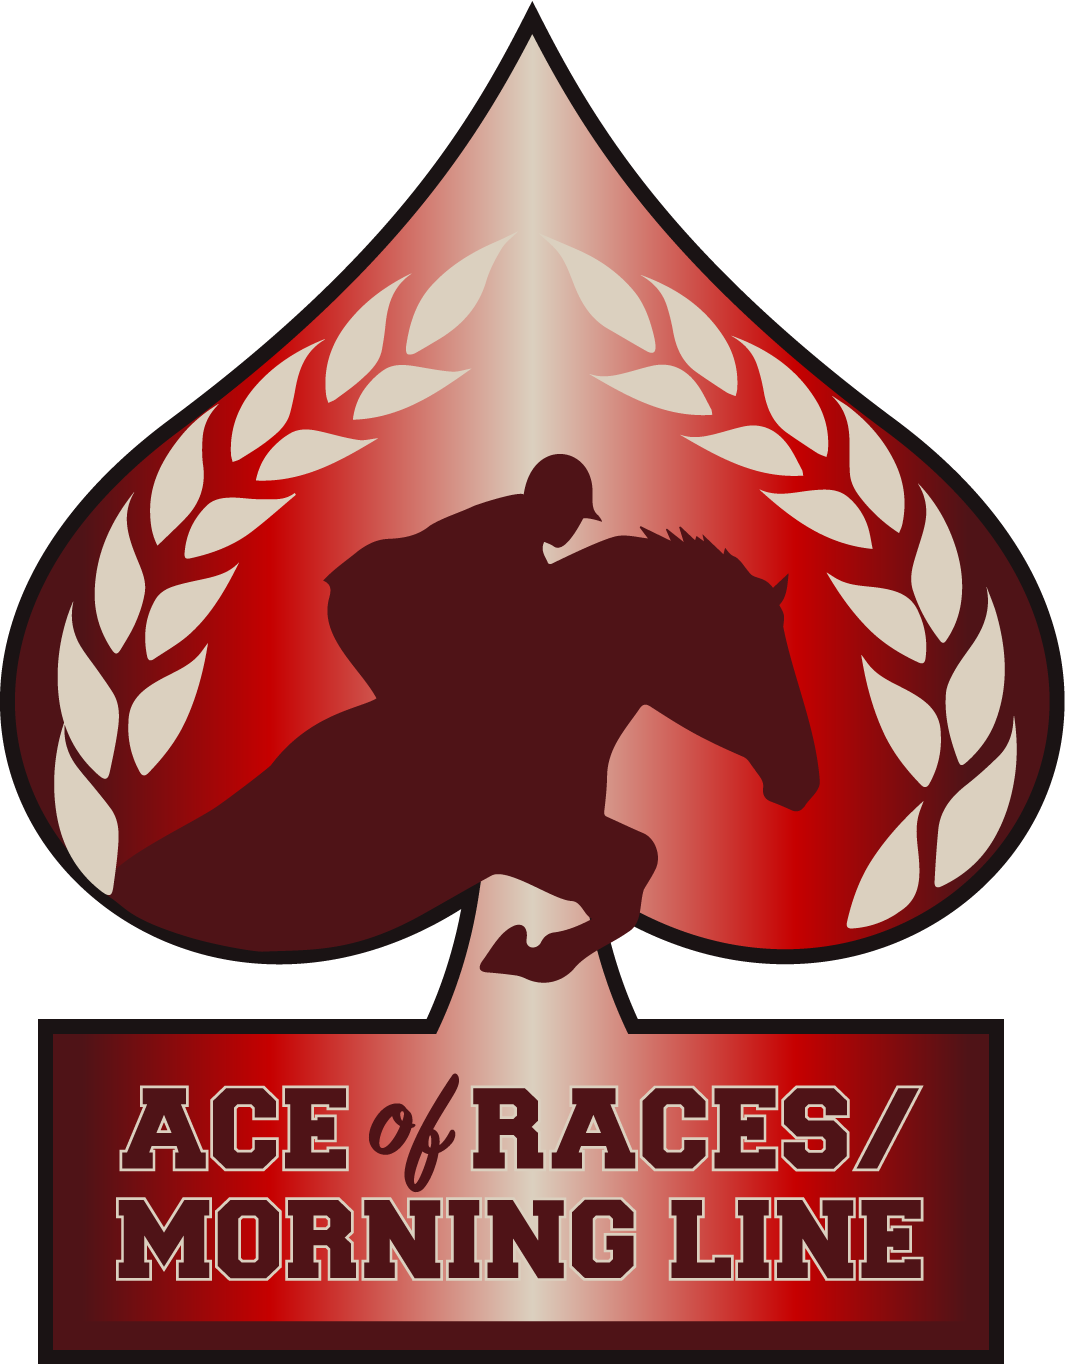 Ace of Races / Morning Line logo